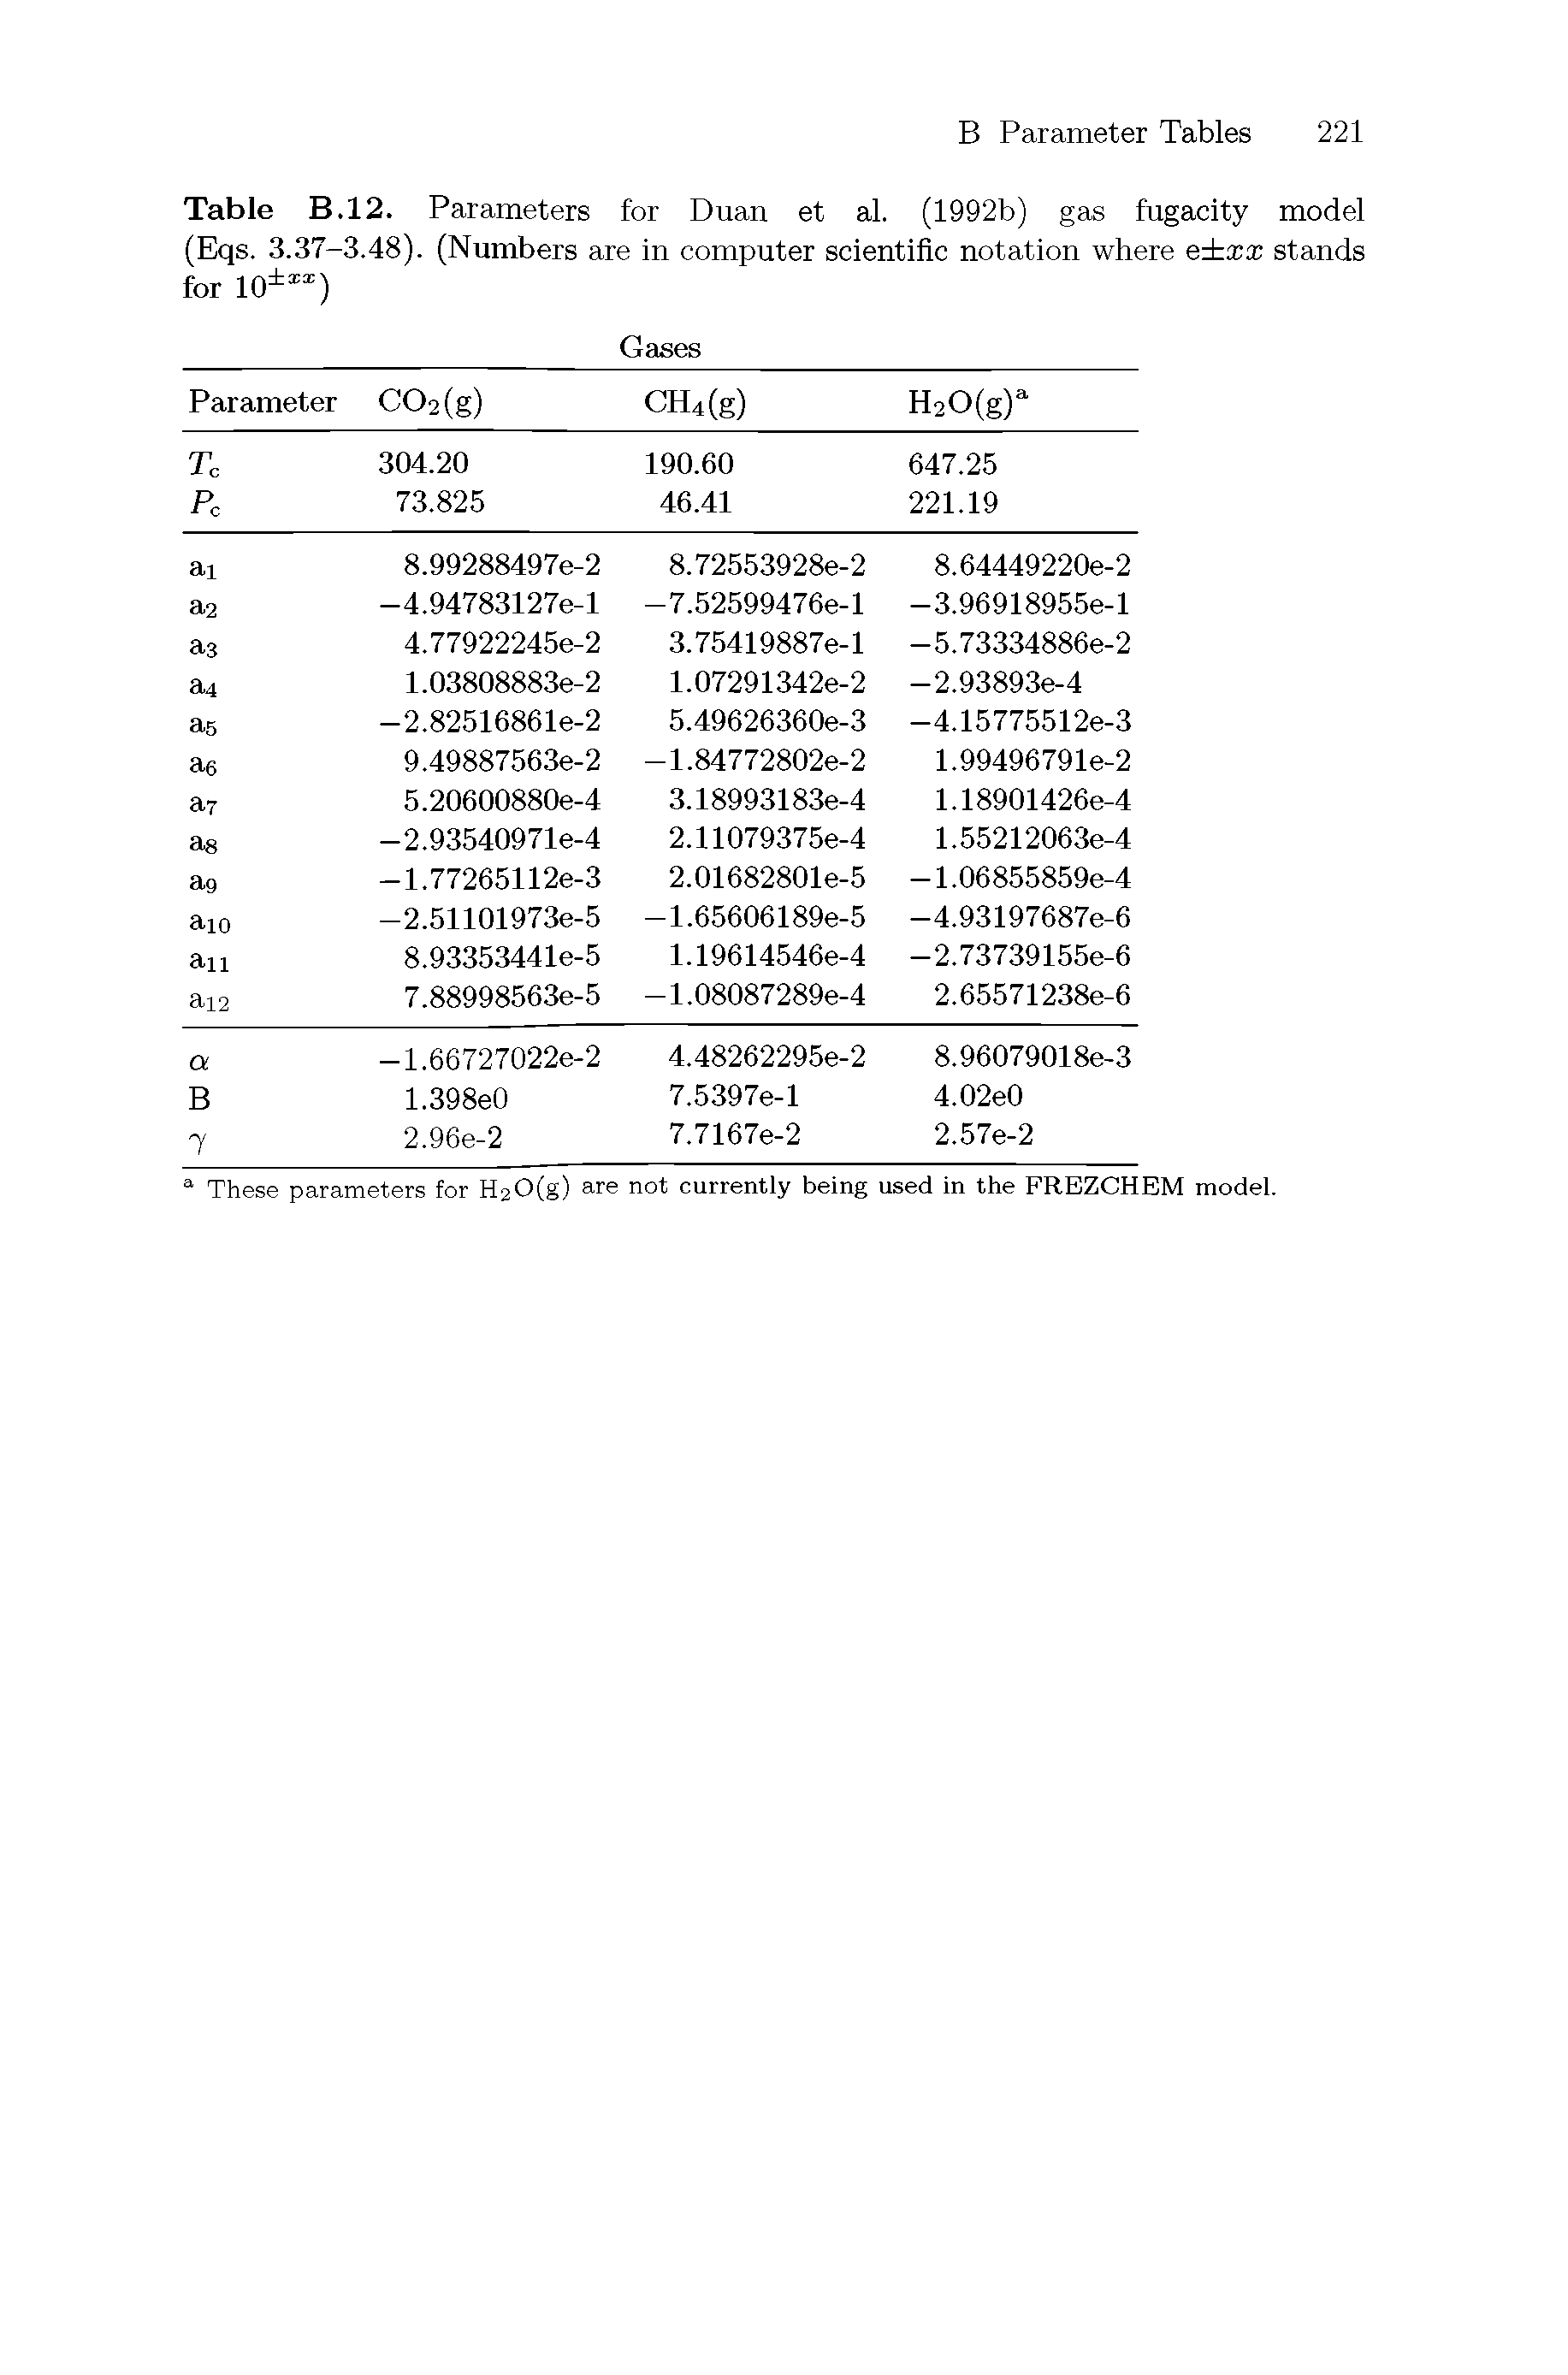 Table B.12. Parameters for Duan et al. (1992b) gas fugacity model (Eqs. 3.37-3.48). (Numbers are in computer scientific notation where e xx stands for 10 xx)...